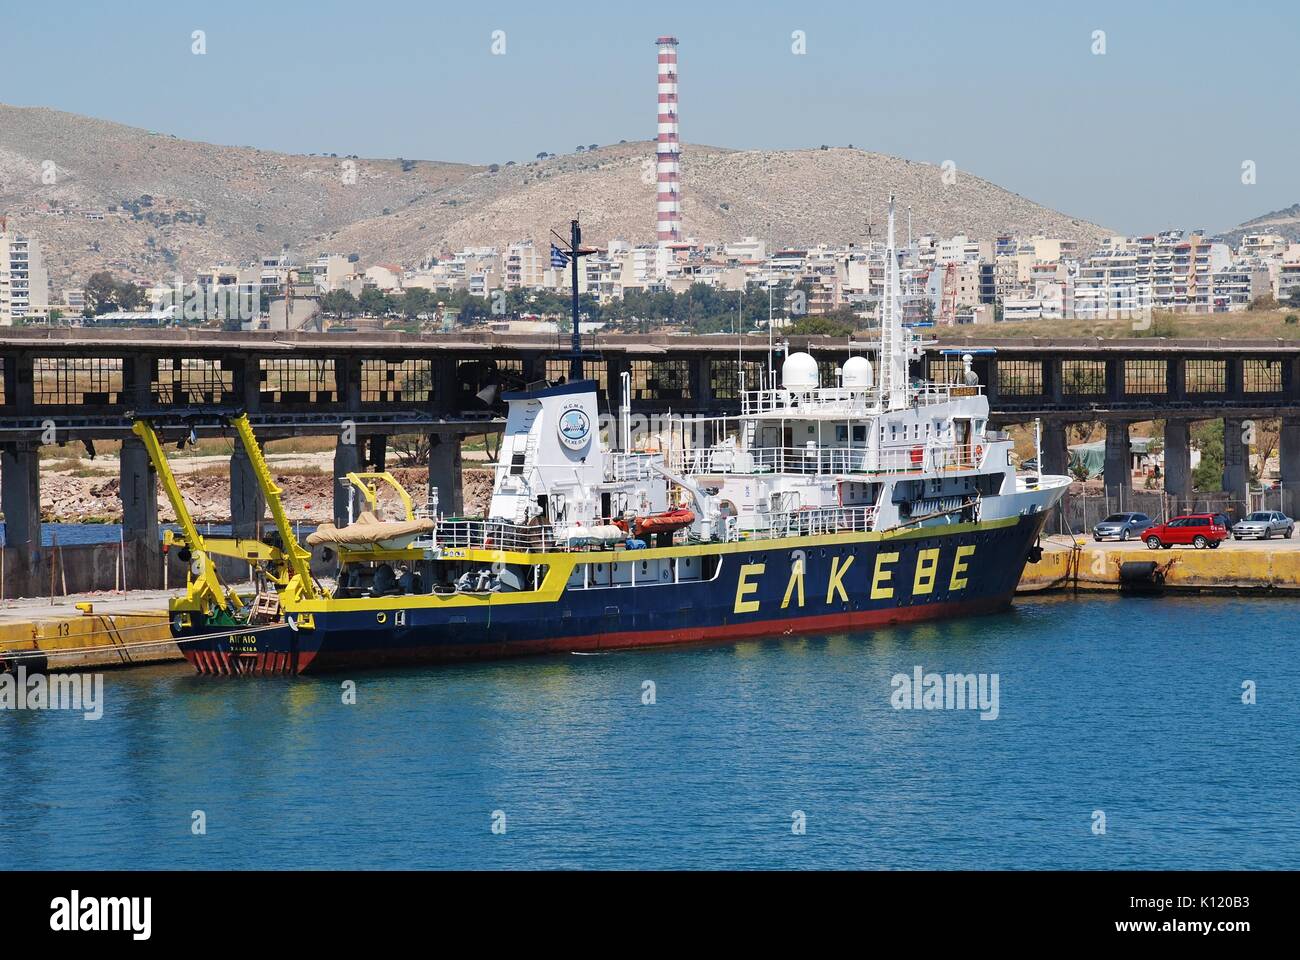 Aegaeo, marine research vessel of the Institute of Oceanography (part of the Hellenic Centre for Marine Research), moored in Piraeus port, Athens. Stock Photo